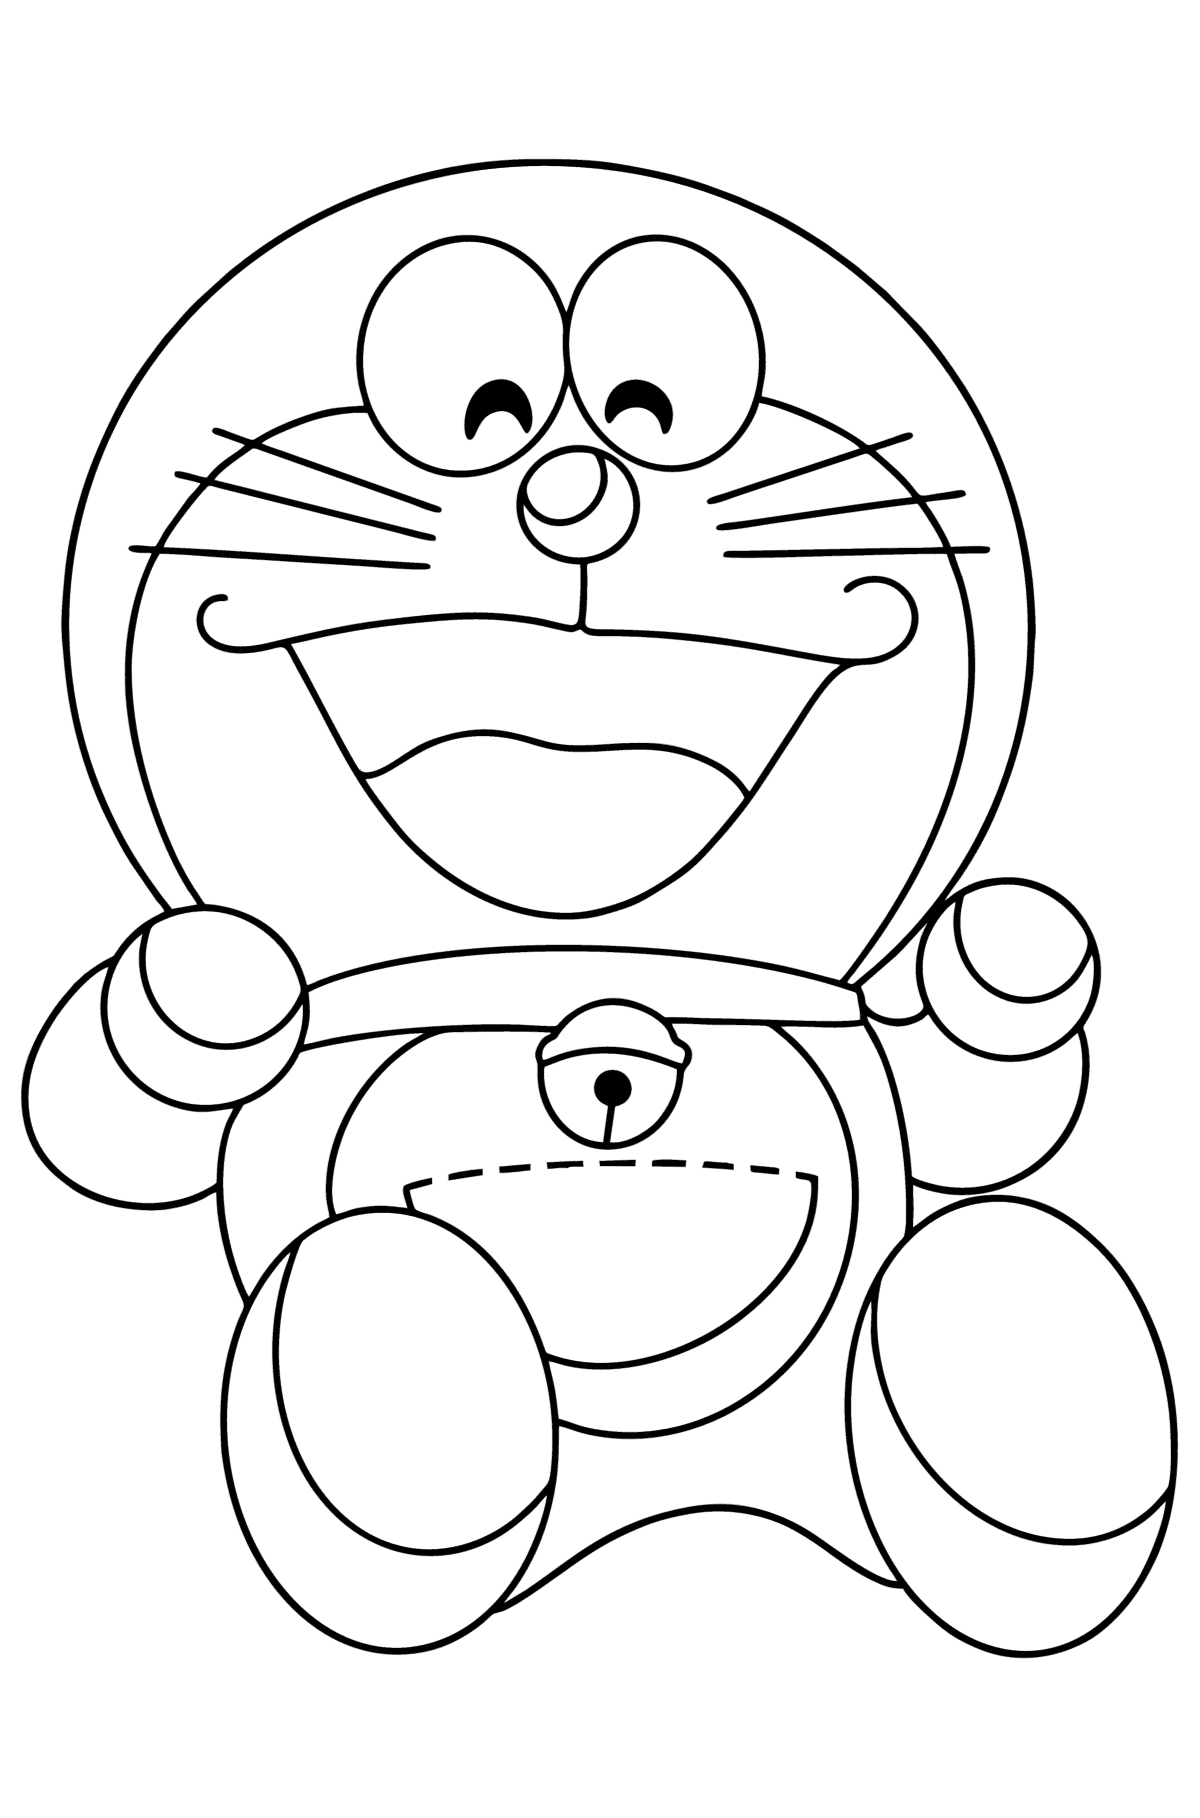 Cute Doraemon сoloring page - Coloring Pages for Kids